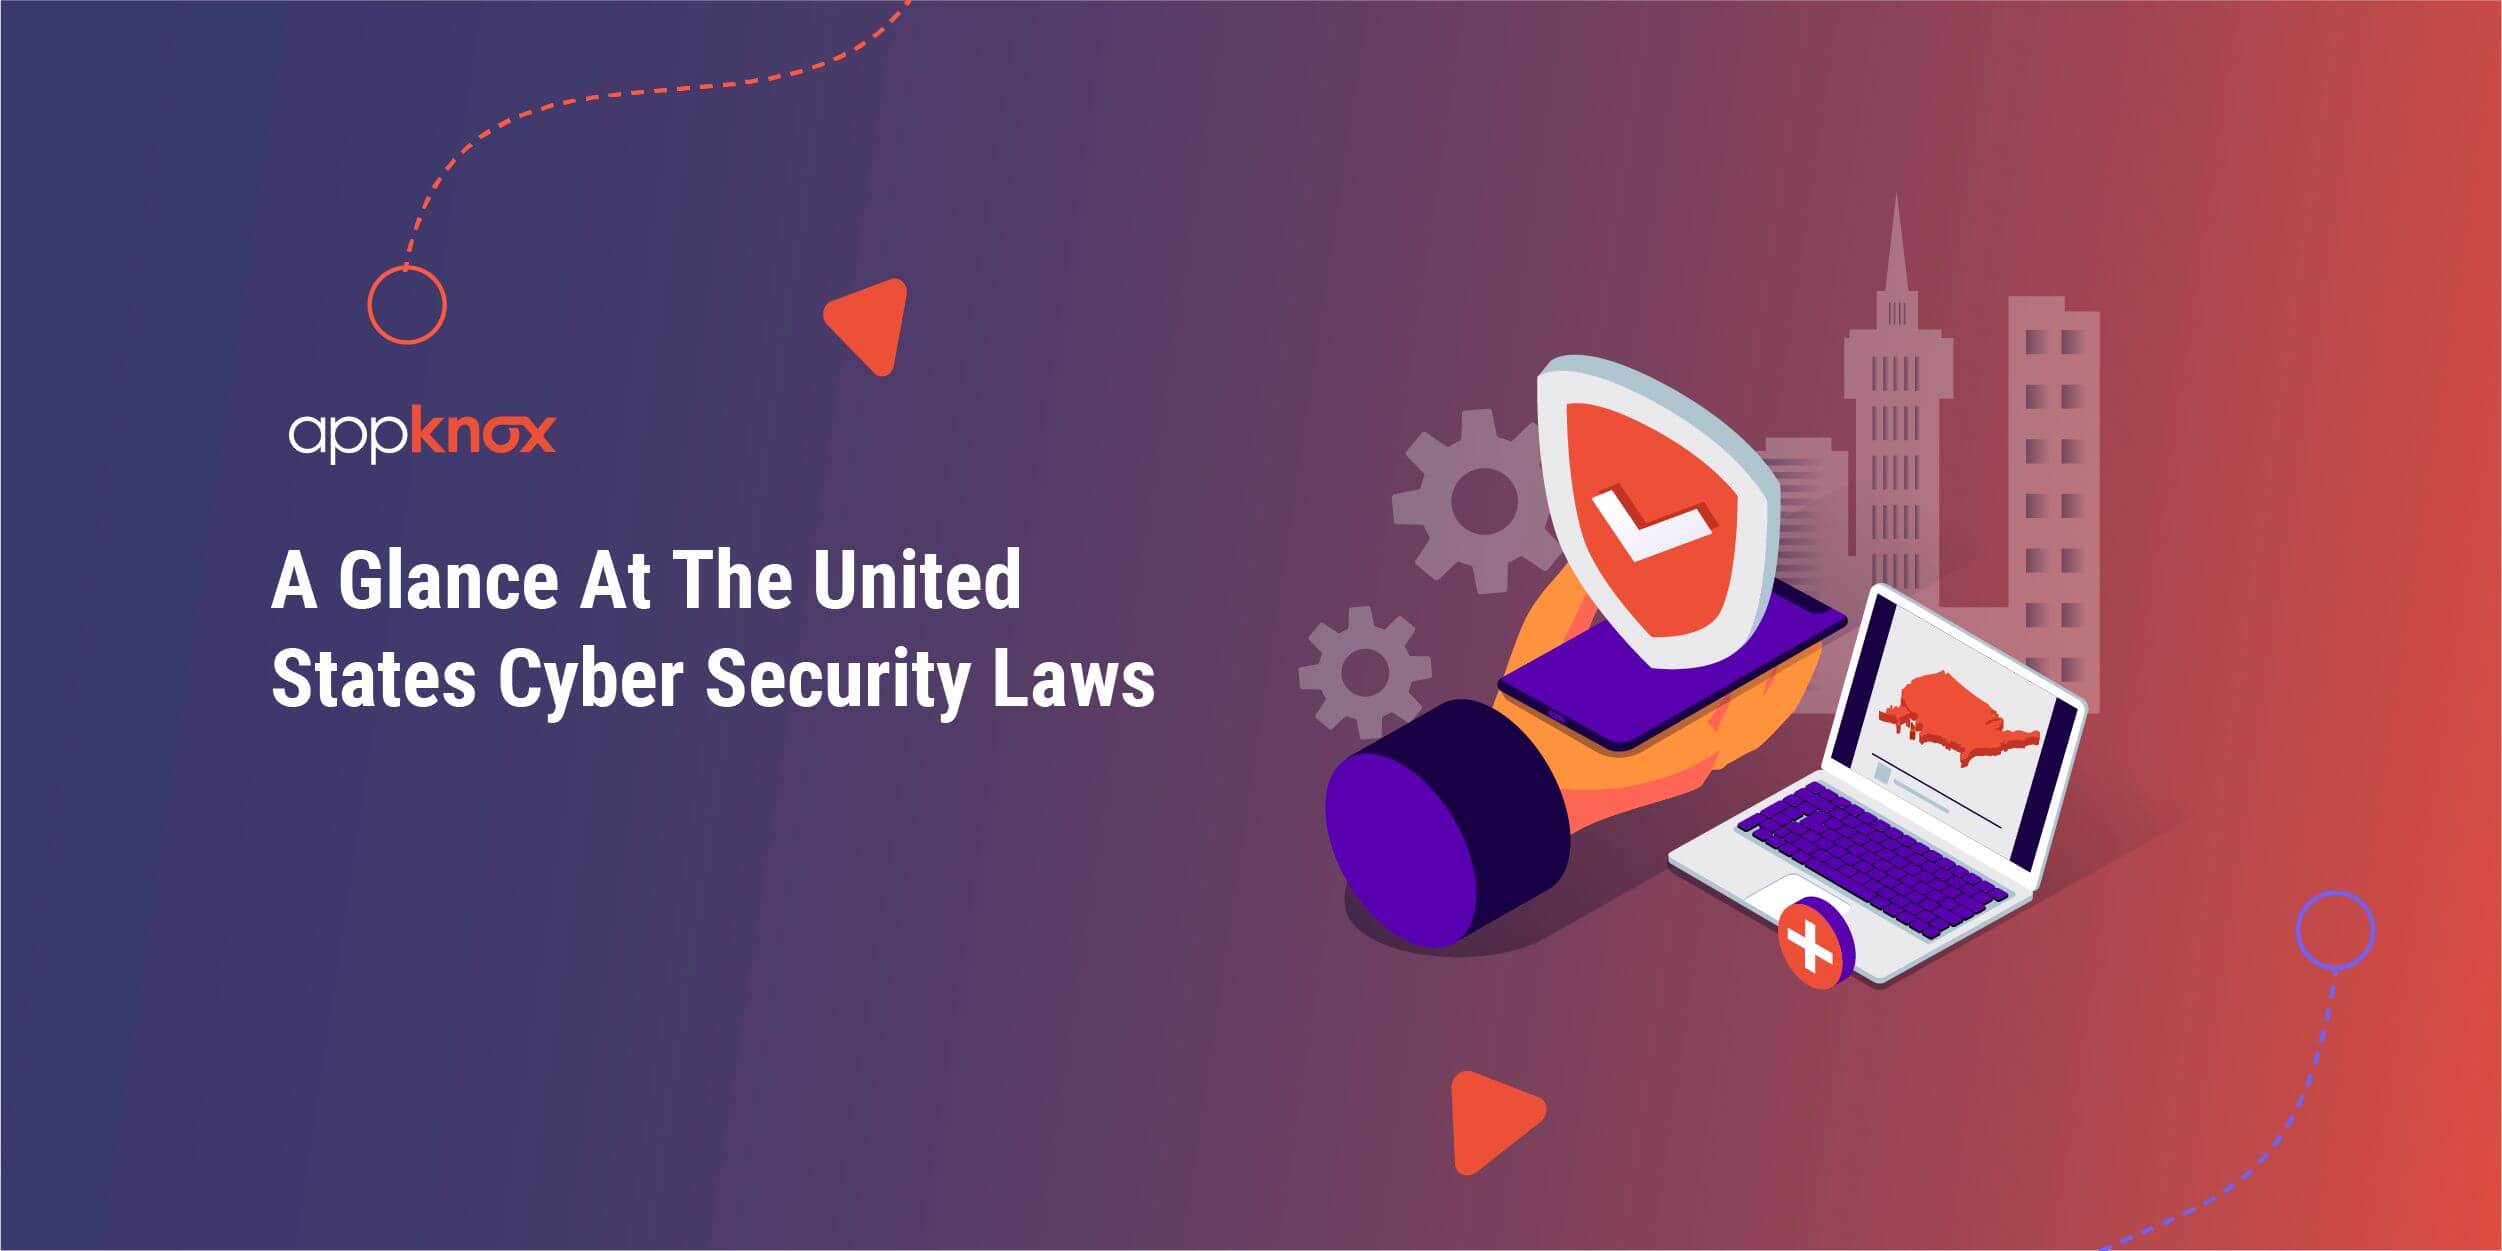 A Glance At The United States Cyber Security Laws